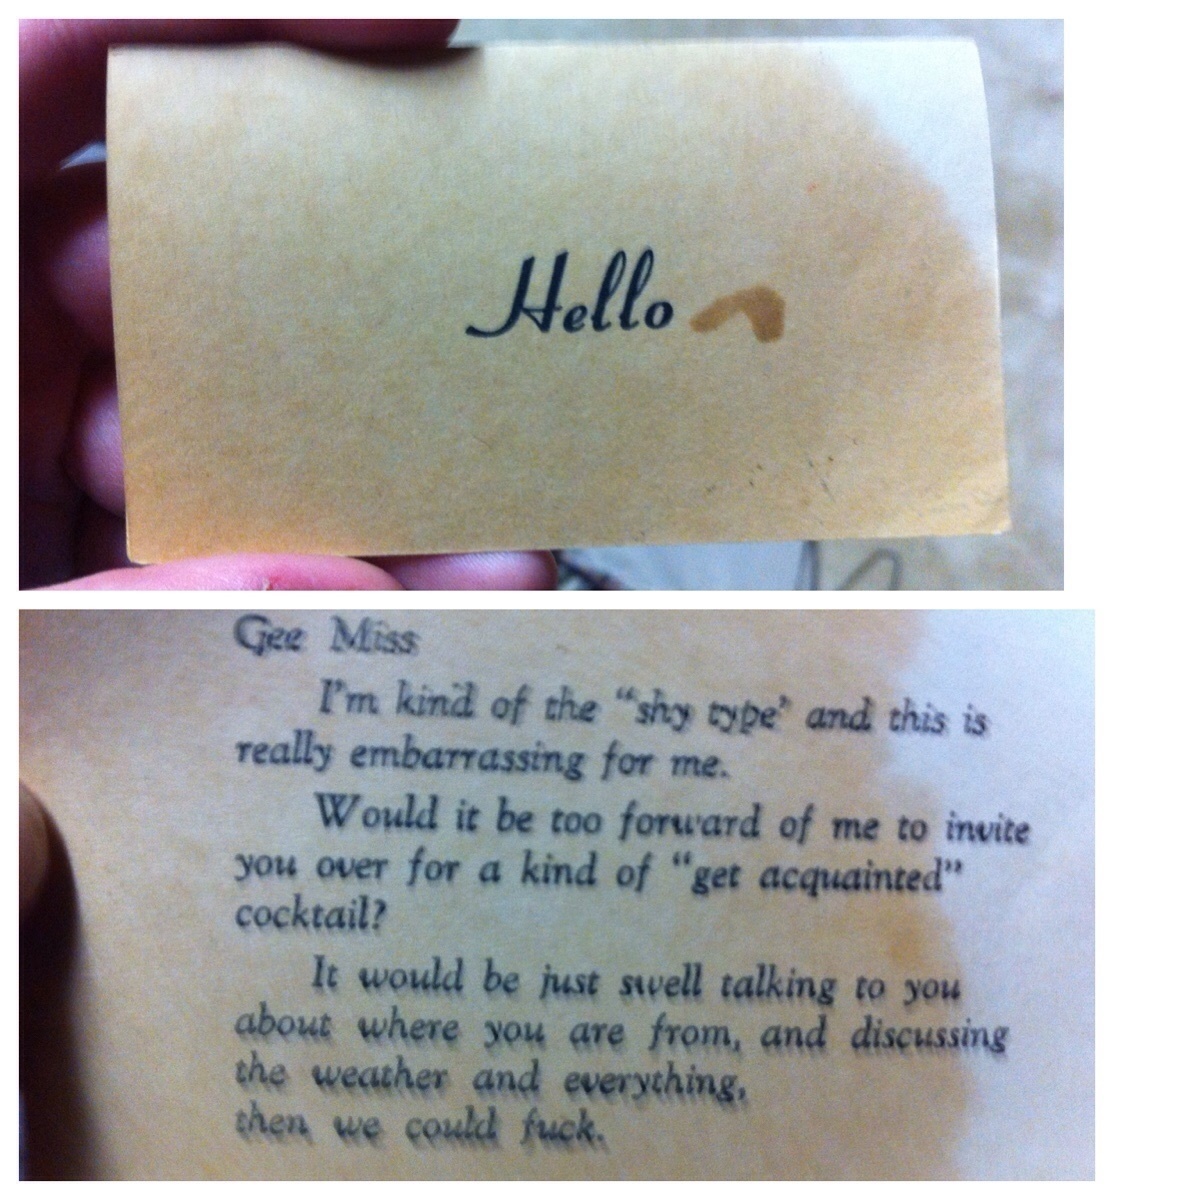 "Hello- stained business card found while moving the grandparents out."